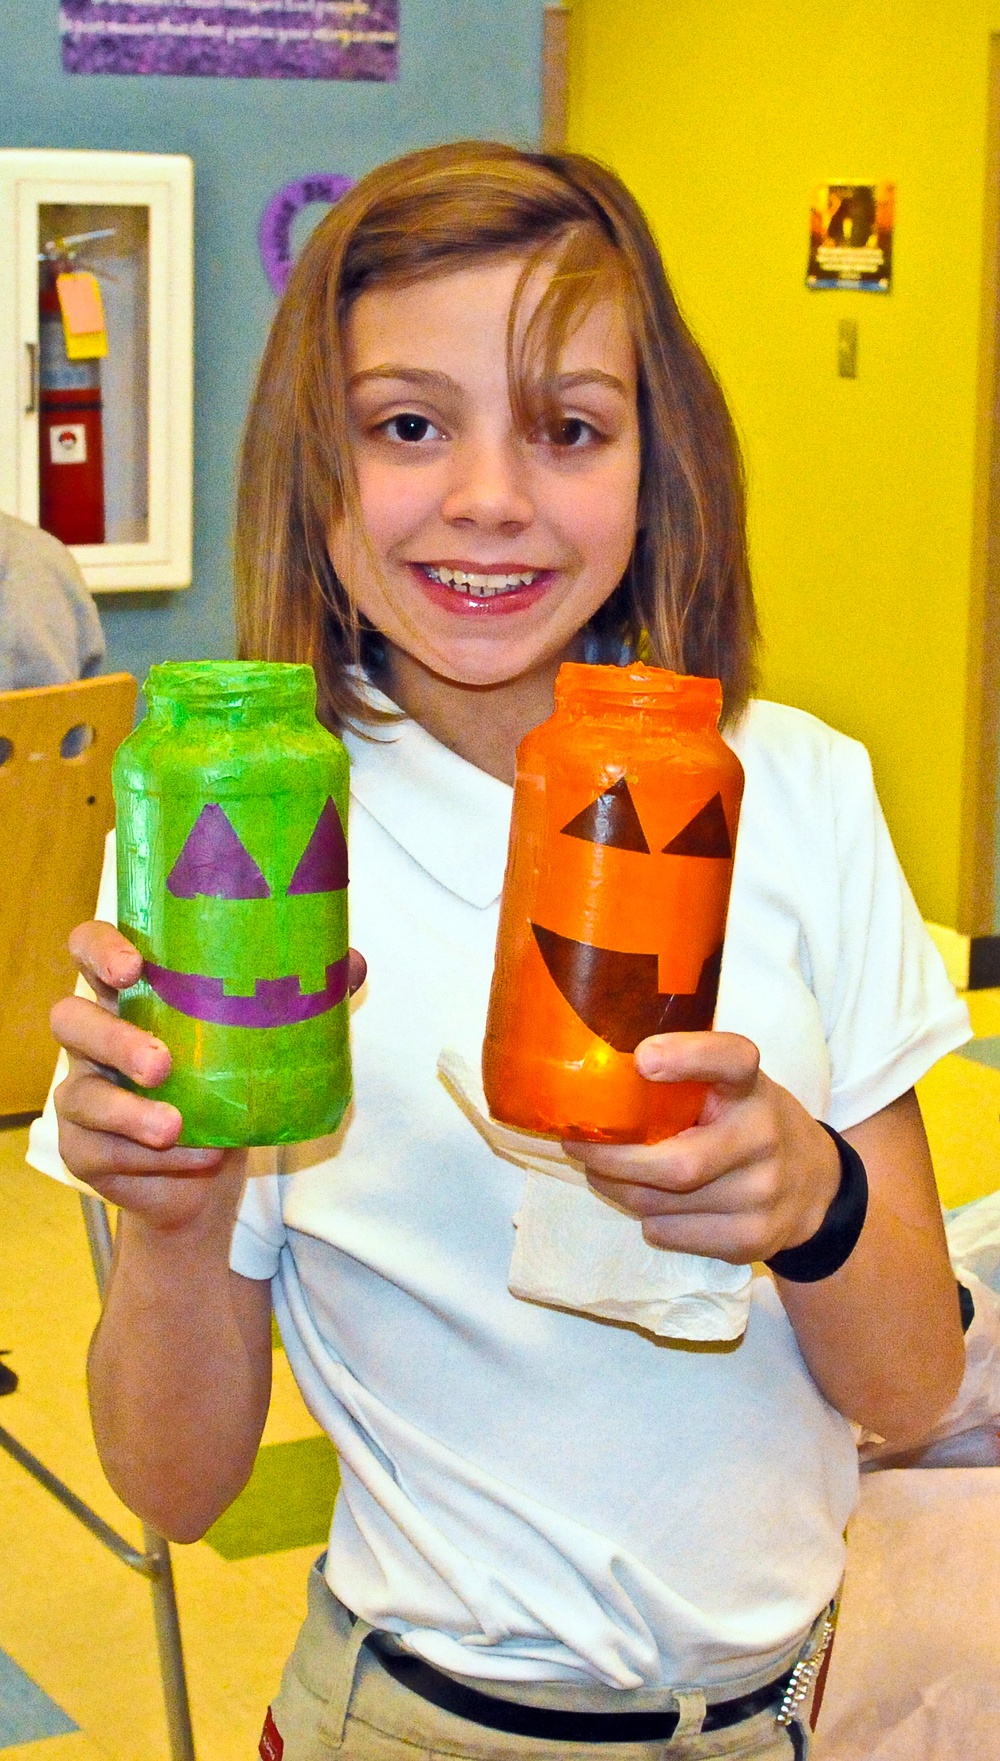 Spooktacular Arts at the Milam Youth Activity Center